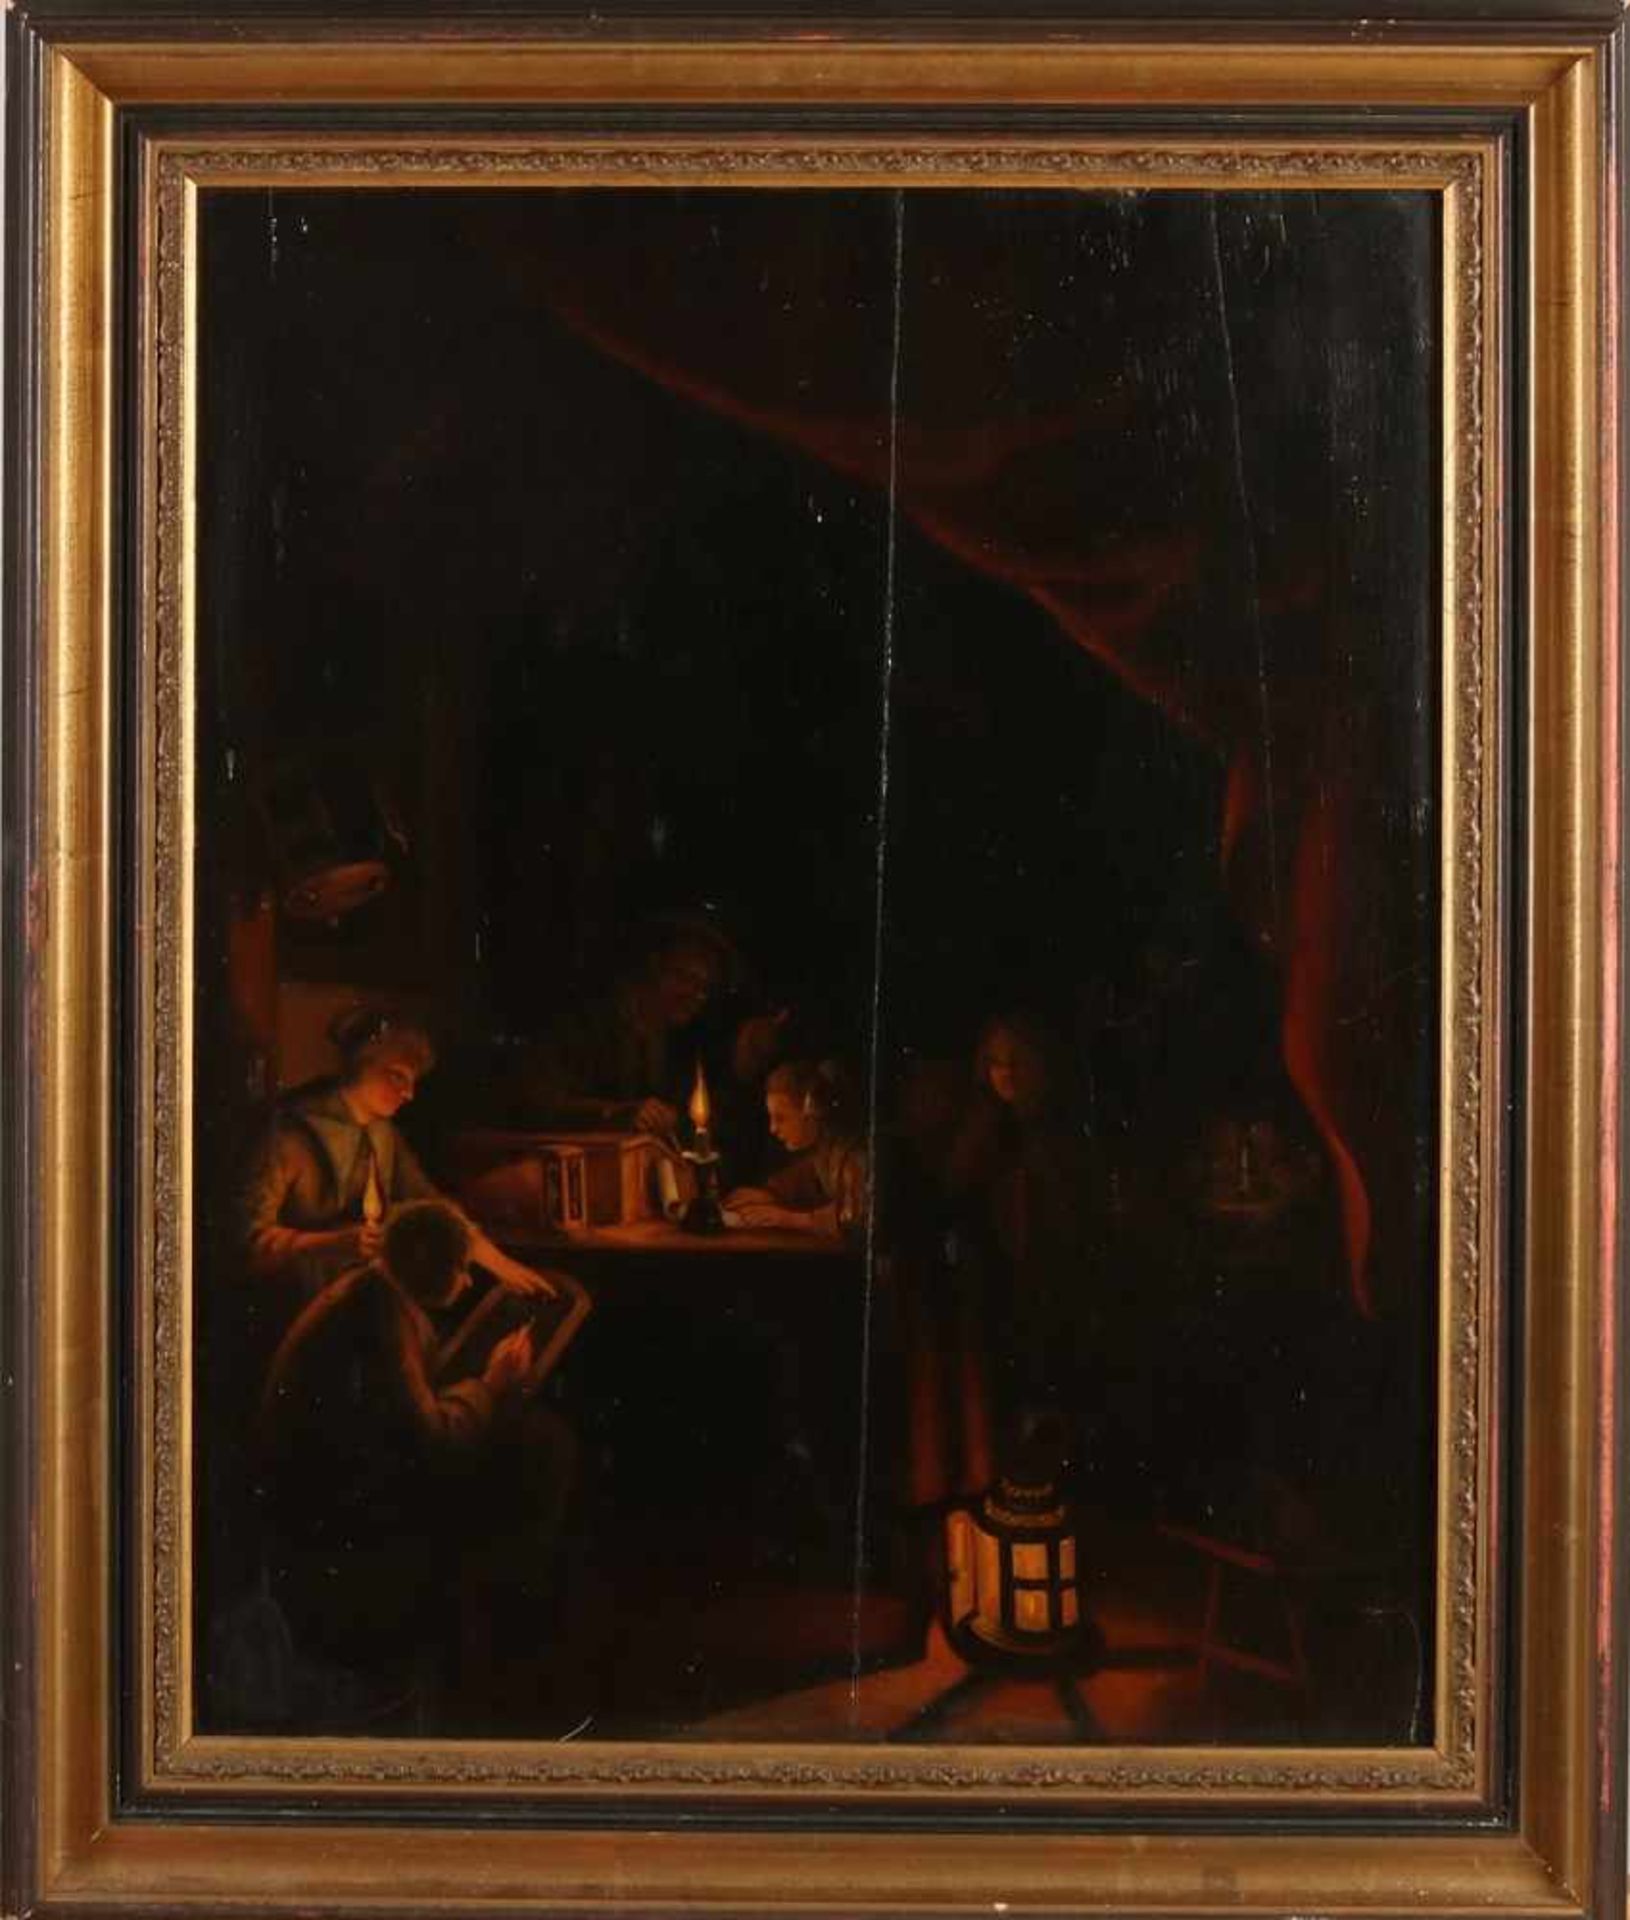 Unclear signed. 19th century. Figures by candlelight. Oil paint on panel. Verso geparketteerd. Size: